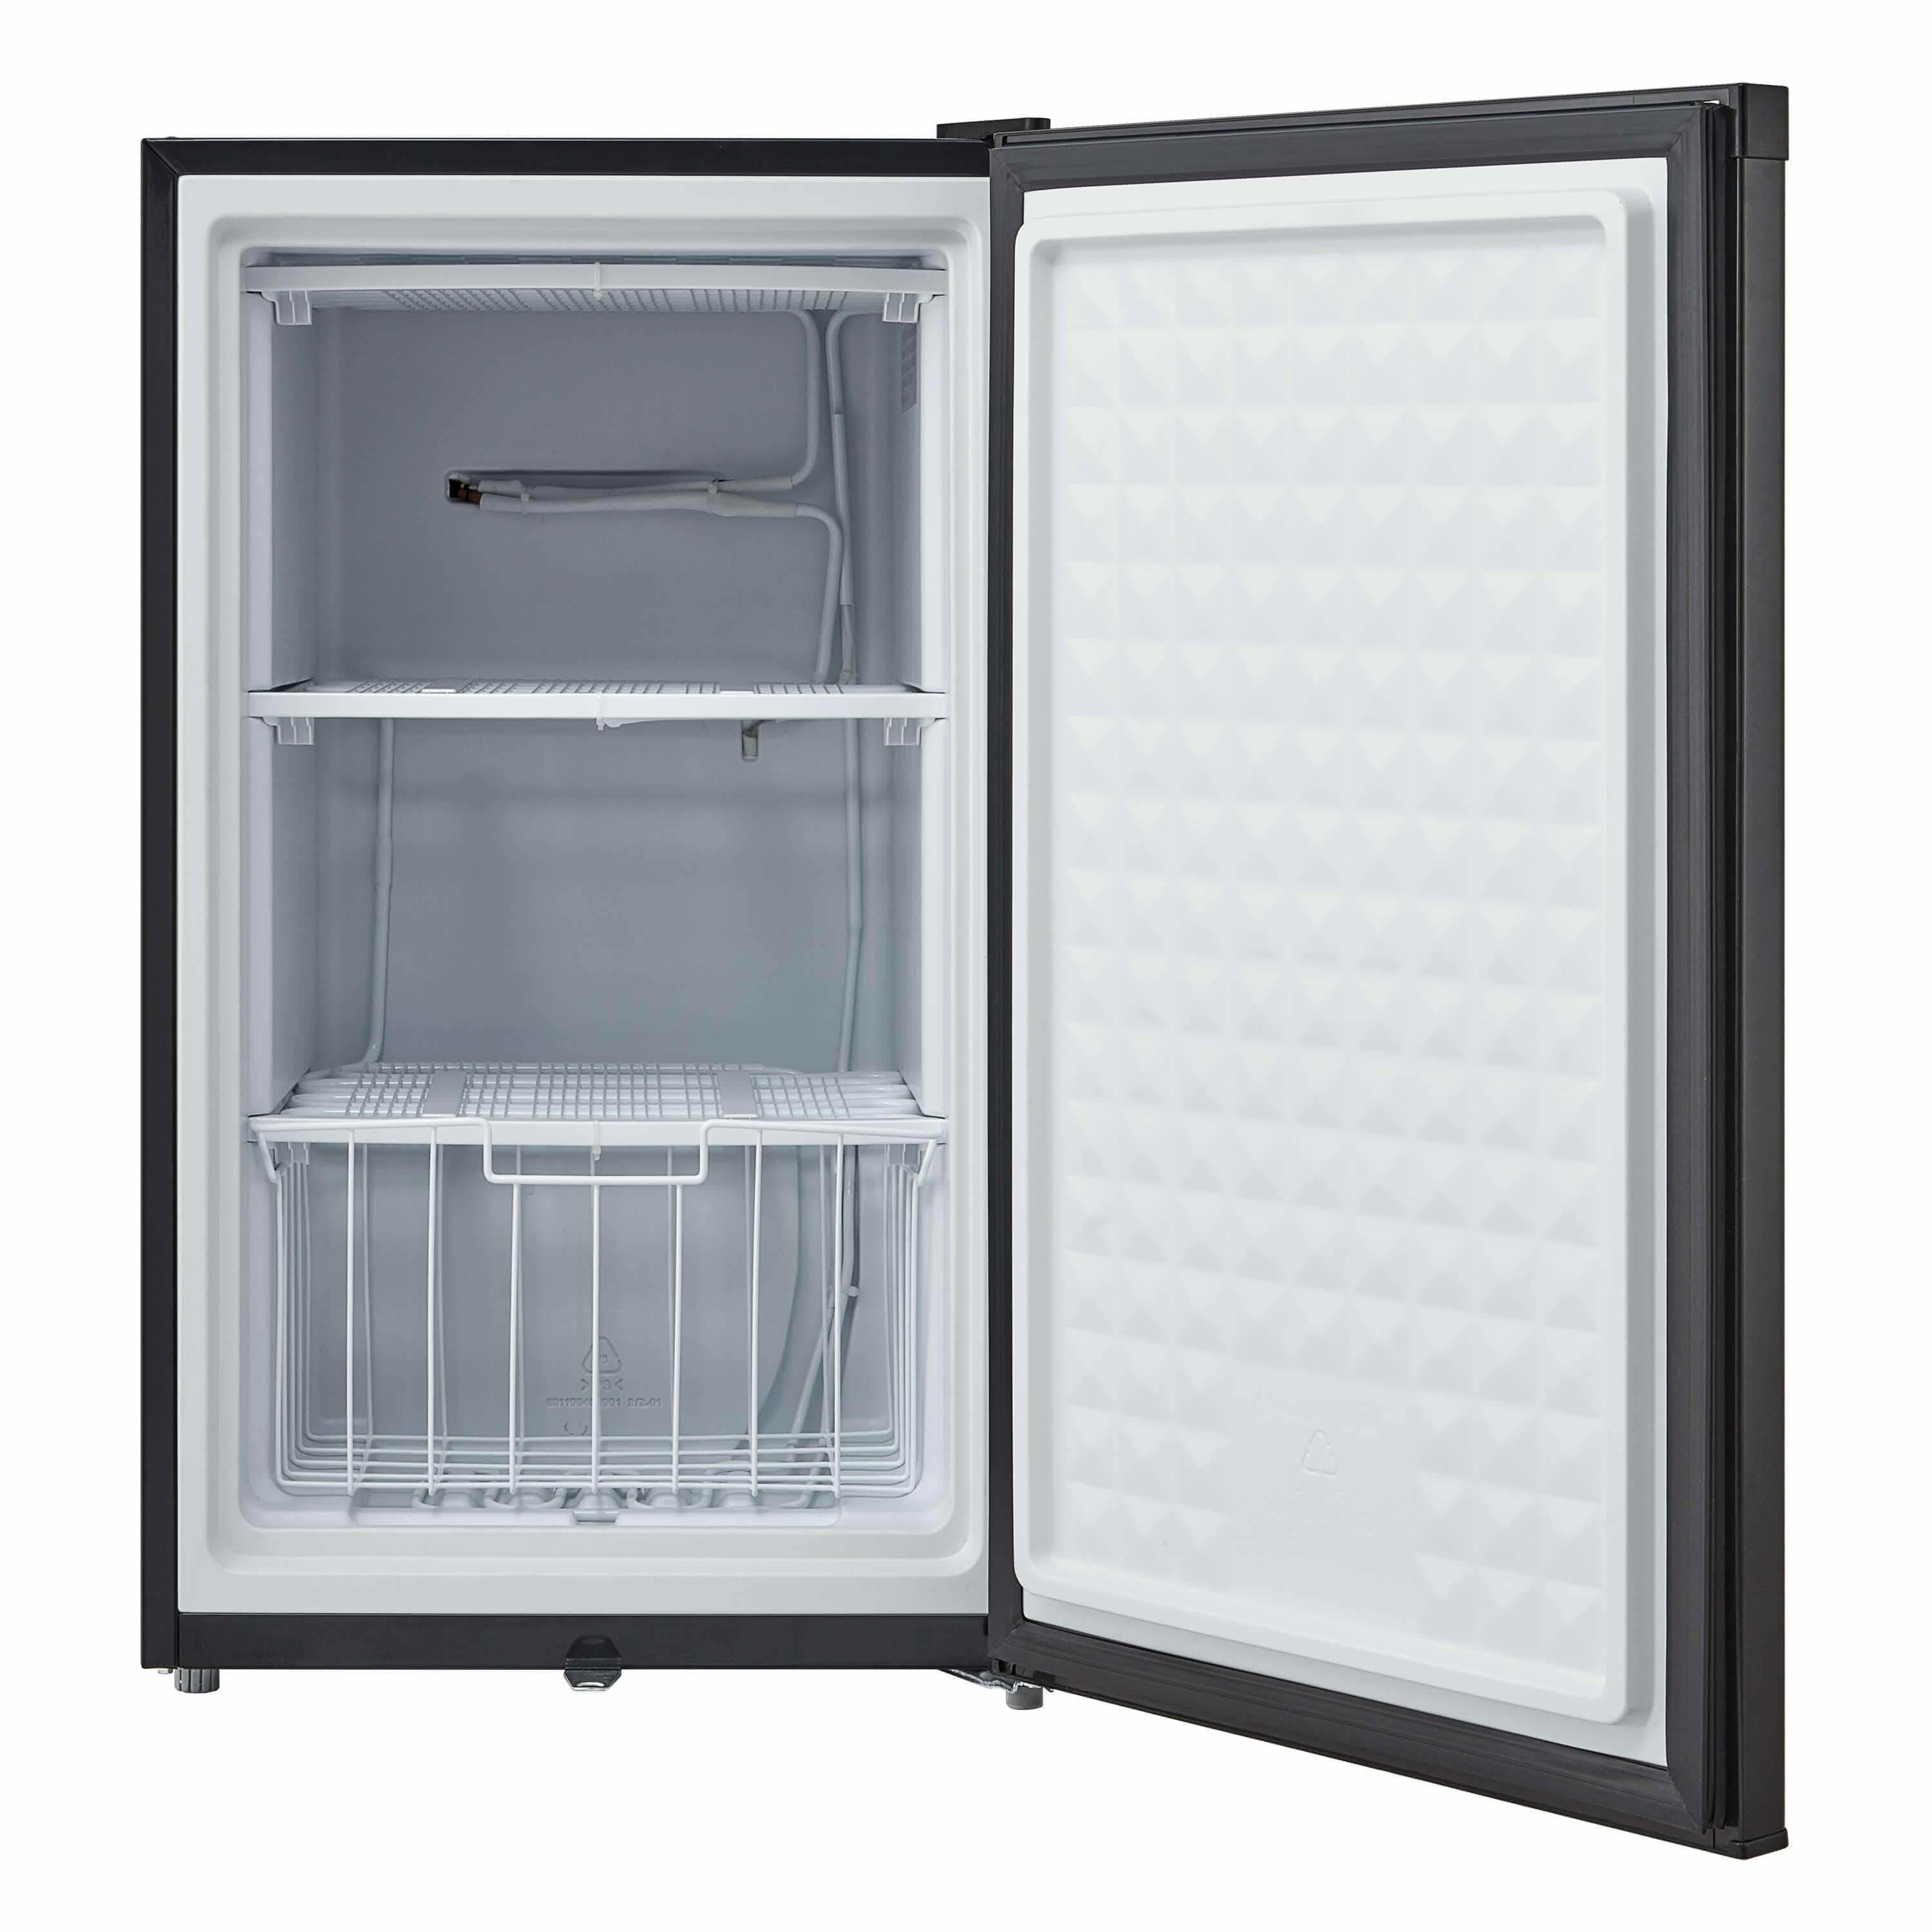 Whynter 3.0 cu. ft. Energy Star Upright Freezer with Lock - Black  CUF-301BK Wine Coolers Empire